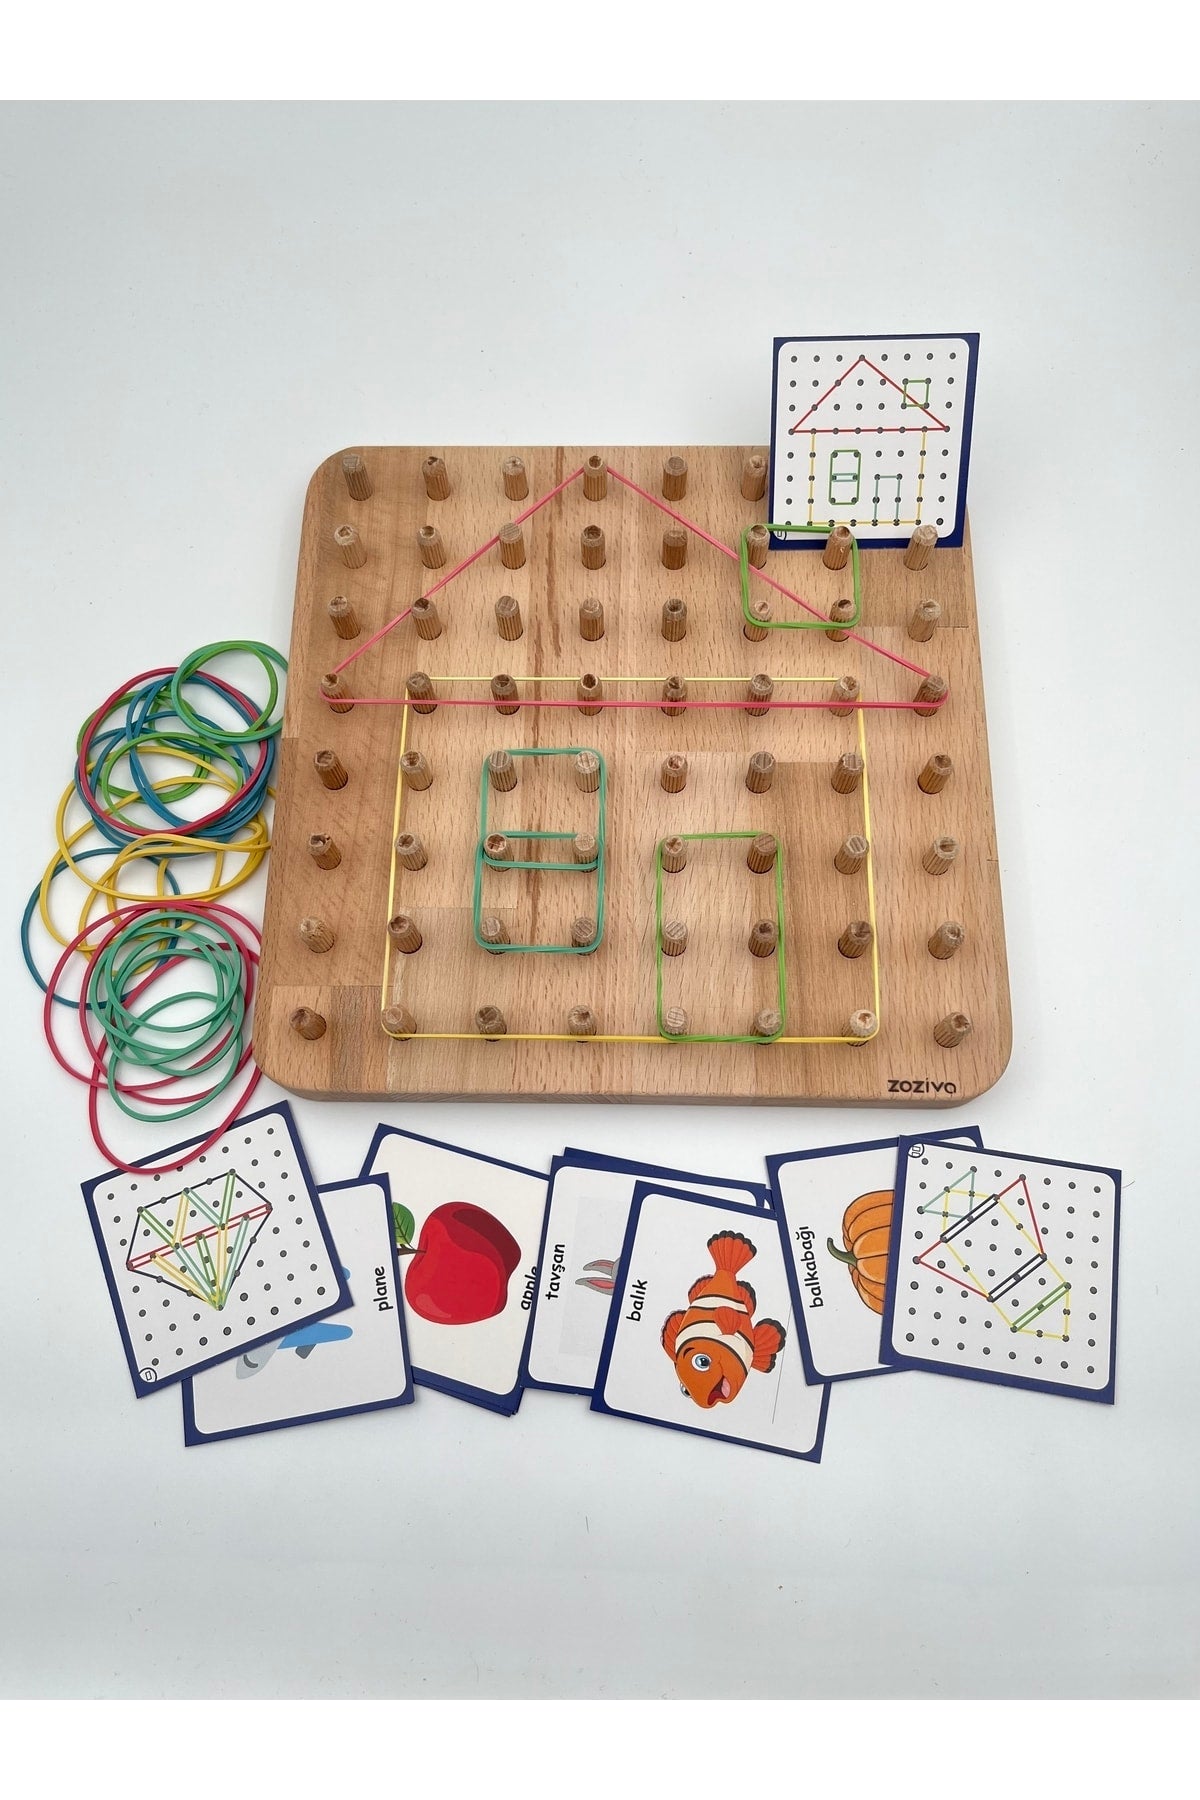 Montessori Educational Wooden Toy – Geoboard / Tire Fitting Child Toy